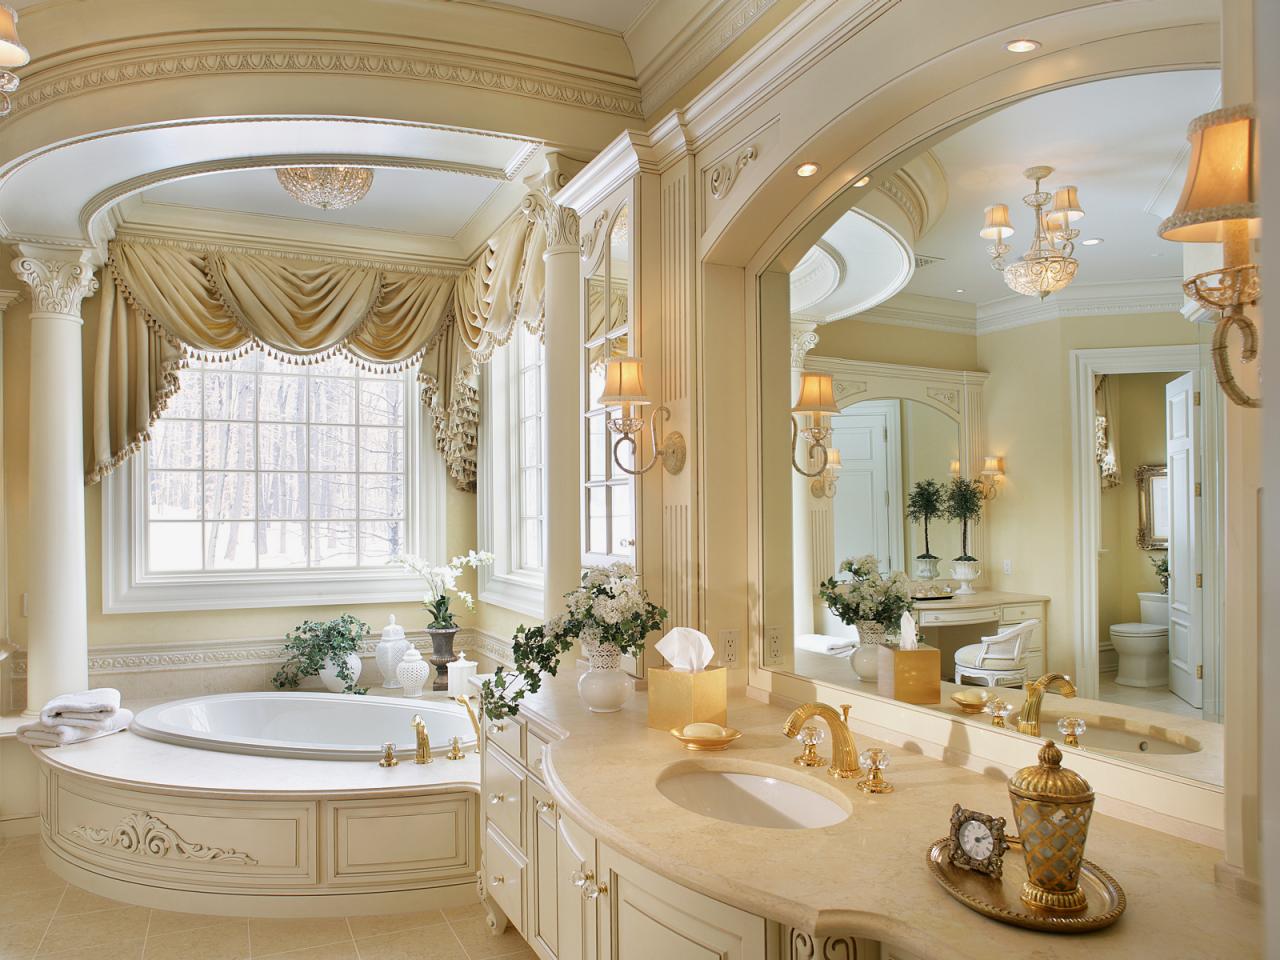 Spacious bathroom in white and gold